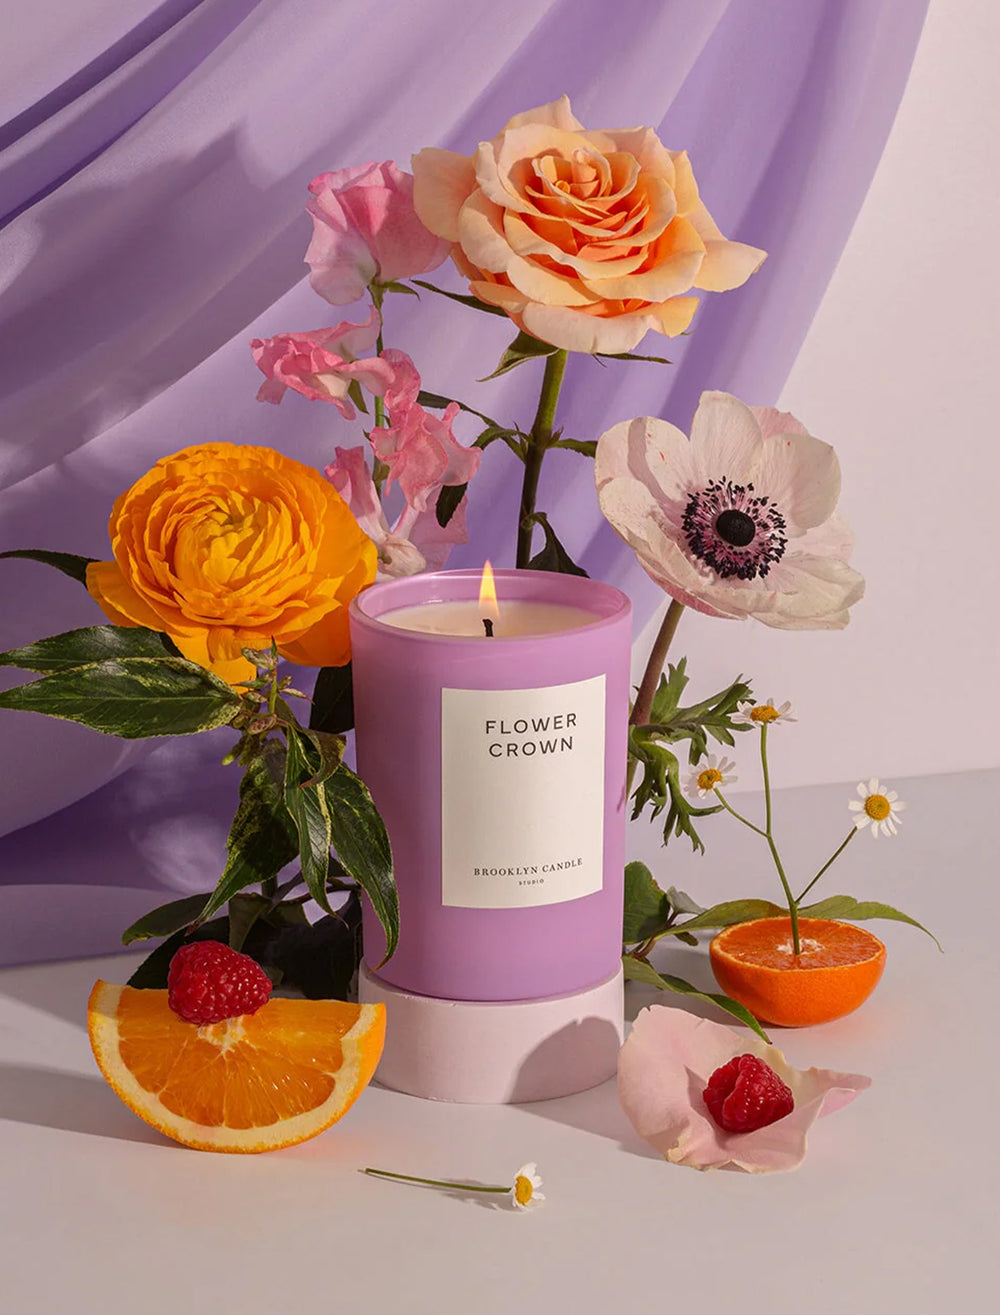 Stylized photography of Brooklyn Candle Studio's flower crown candle.